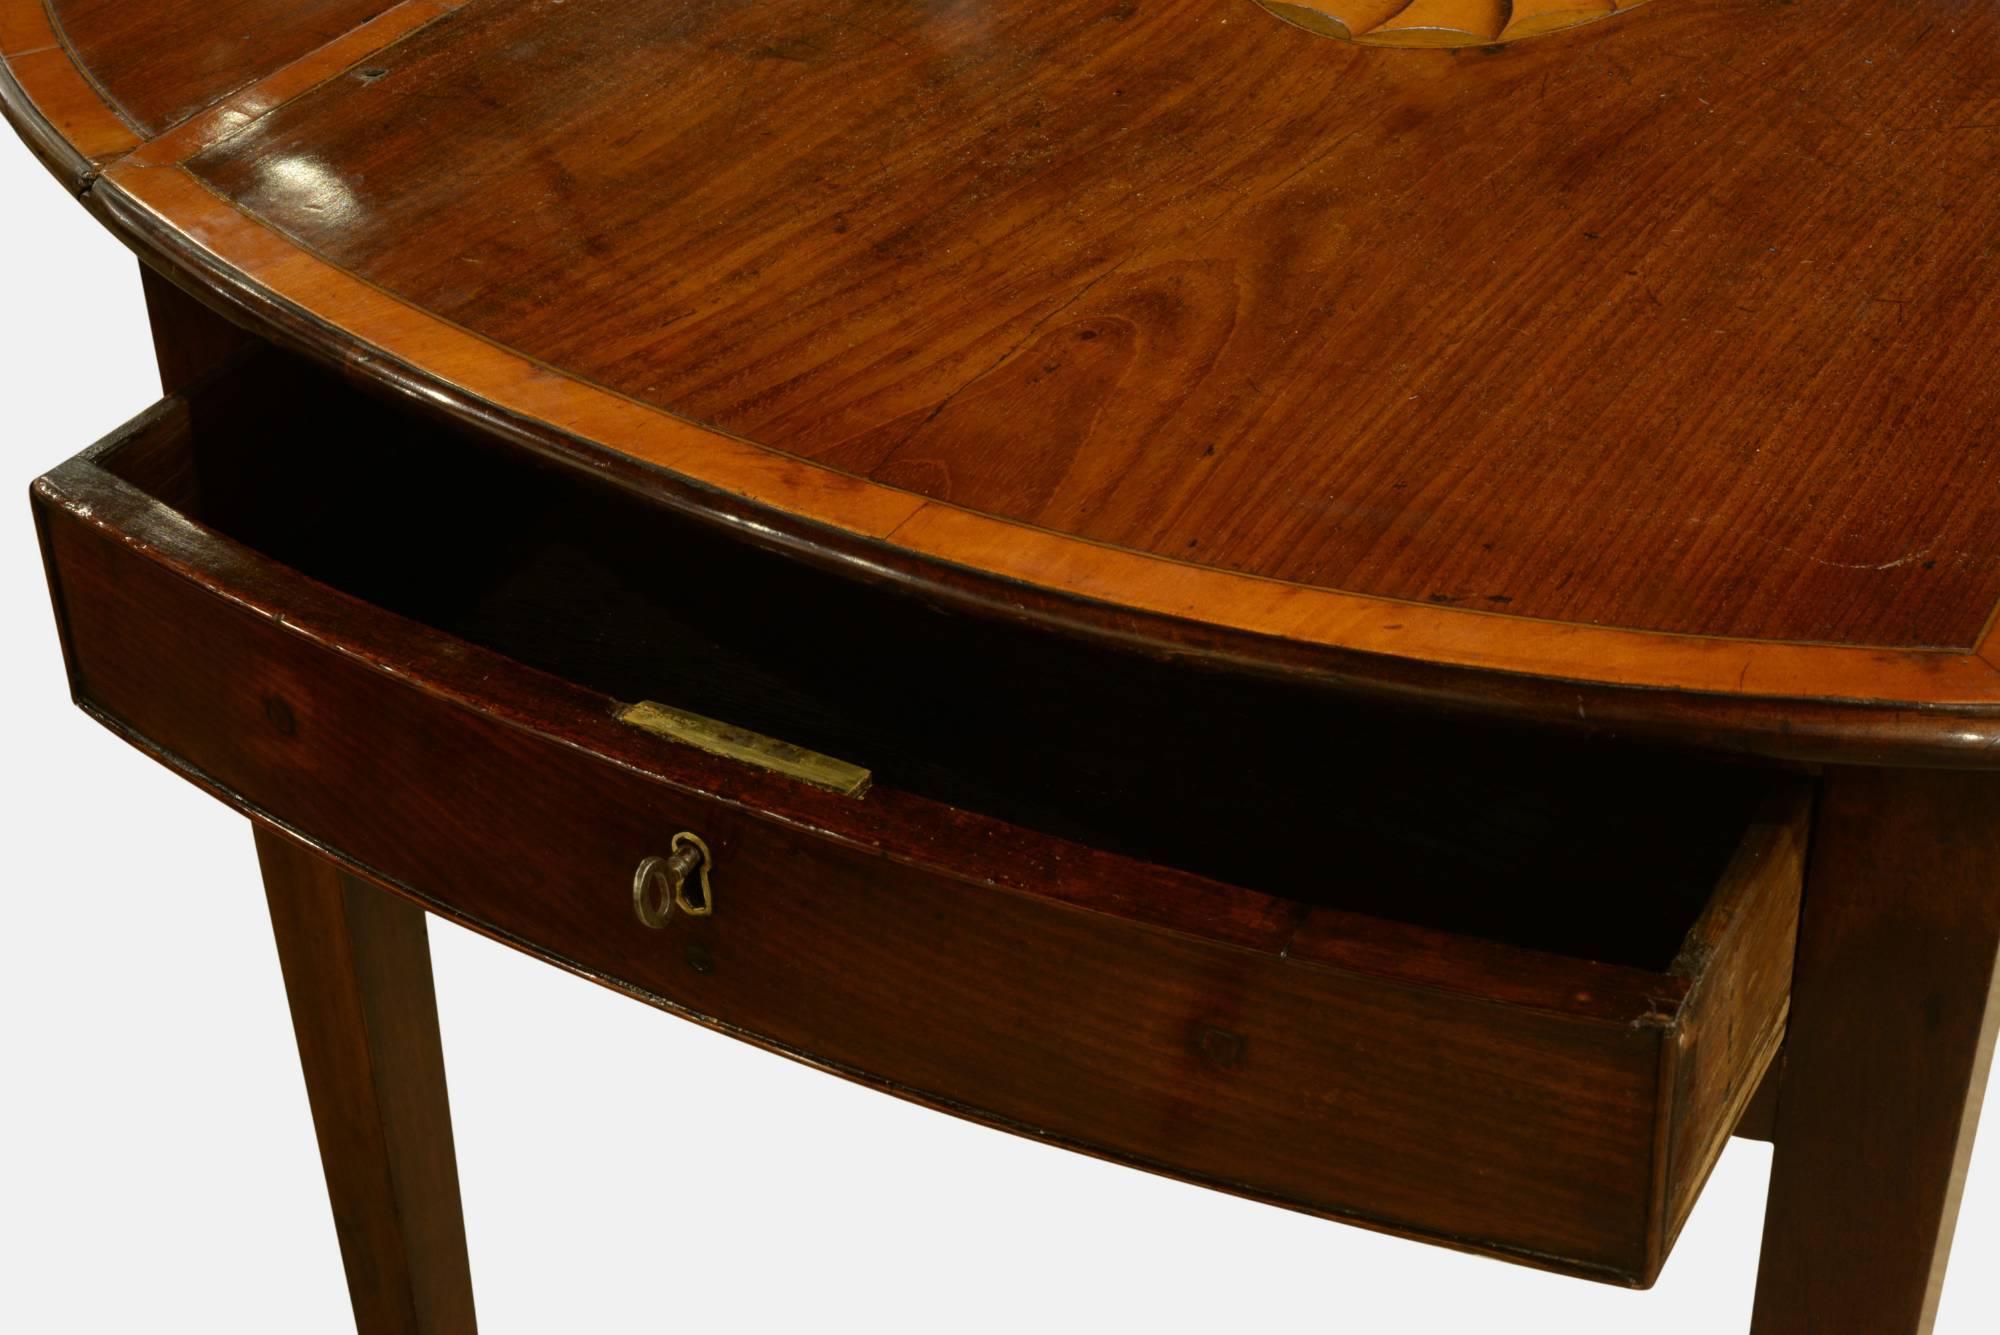 A George III mahogany satinwood banded and inlaid oval Pembroke table on square tapering legs. 
Dimensions: 67.5cm (26.6") - high.
90cm (28.3") - wide leaves up.
46cm - leaves down.
72cm depth.
               